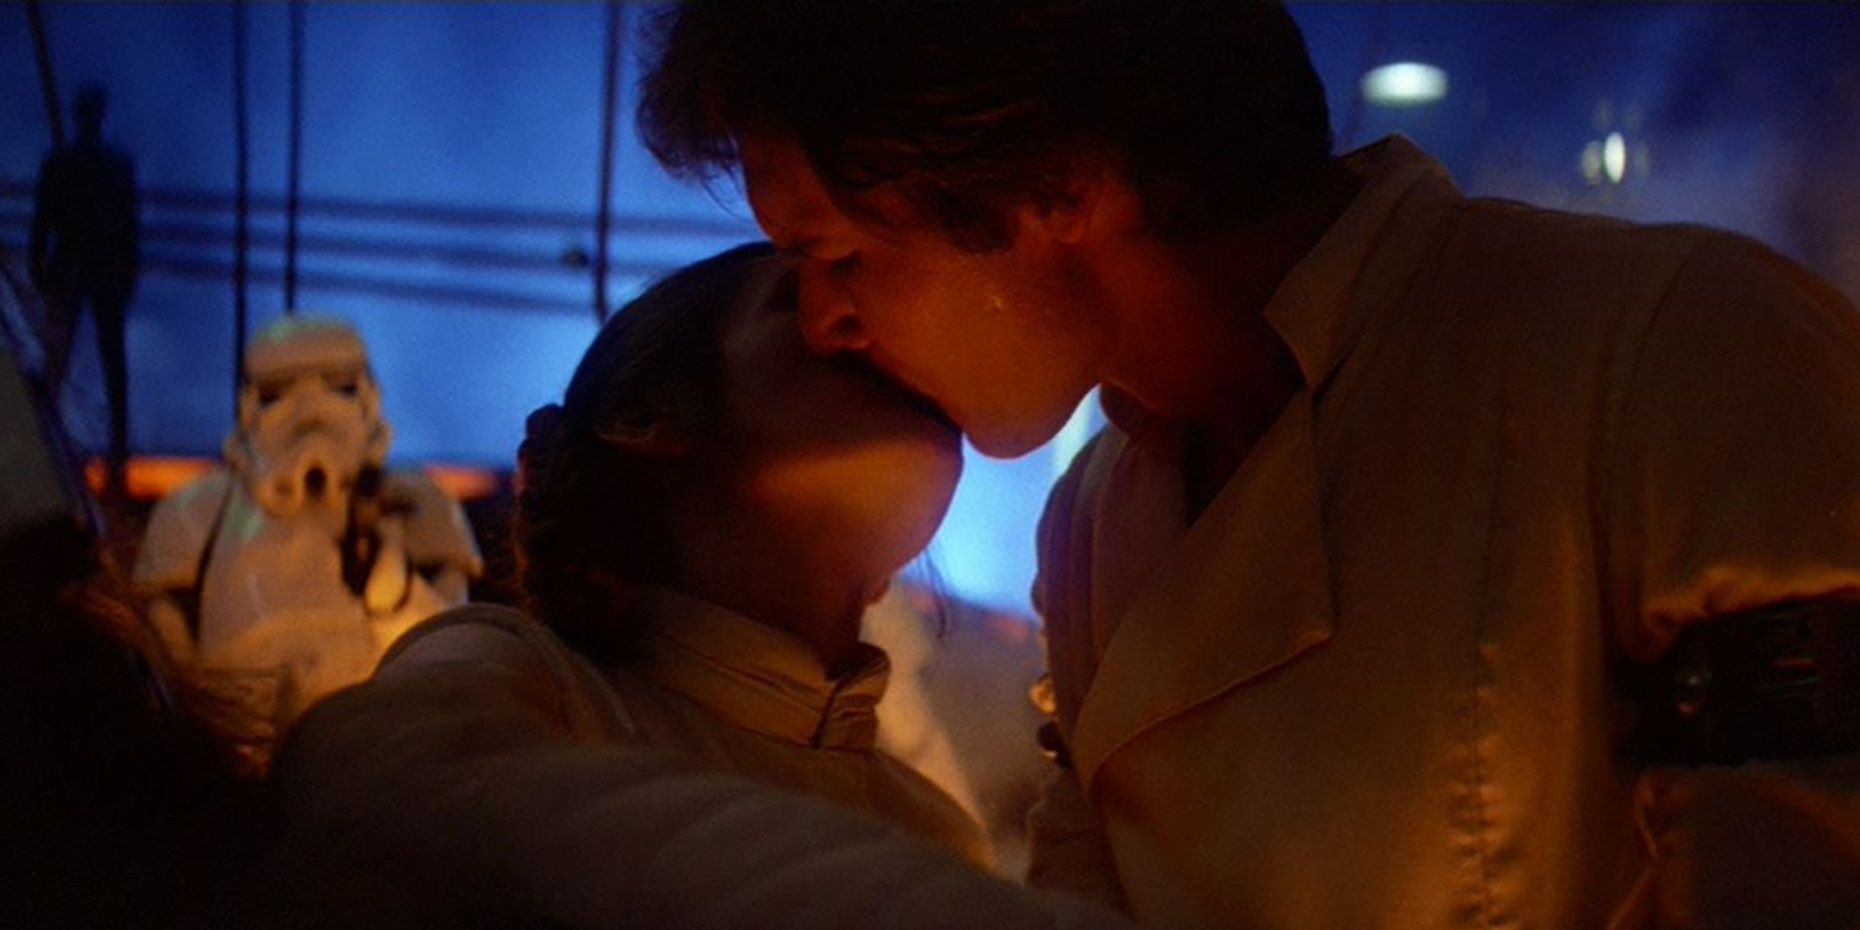 Leia kisses Han in The Empire Strikes Back